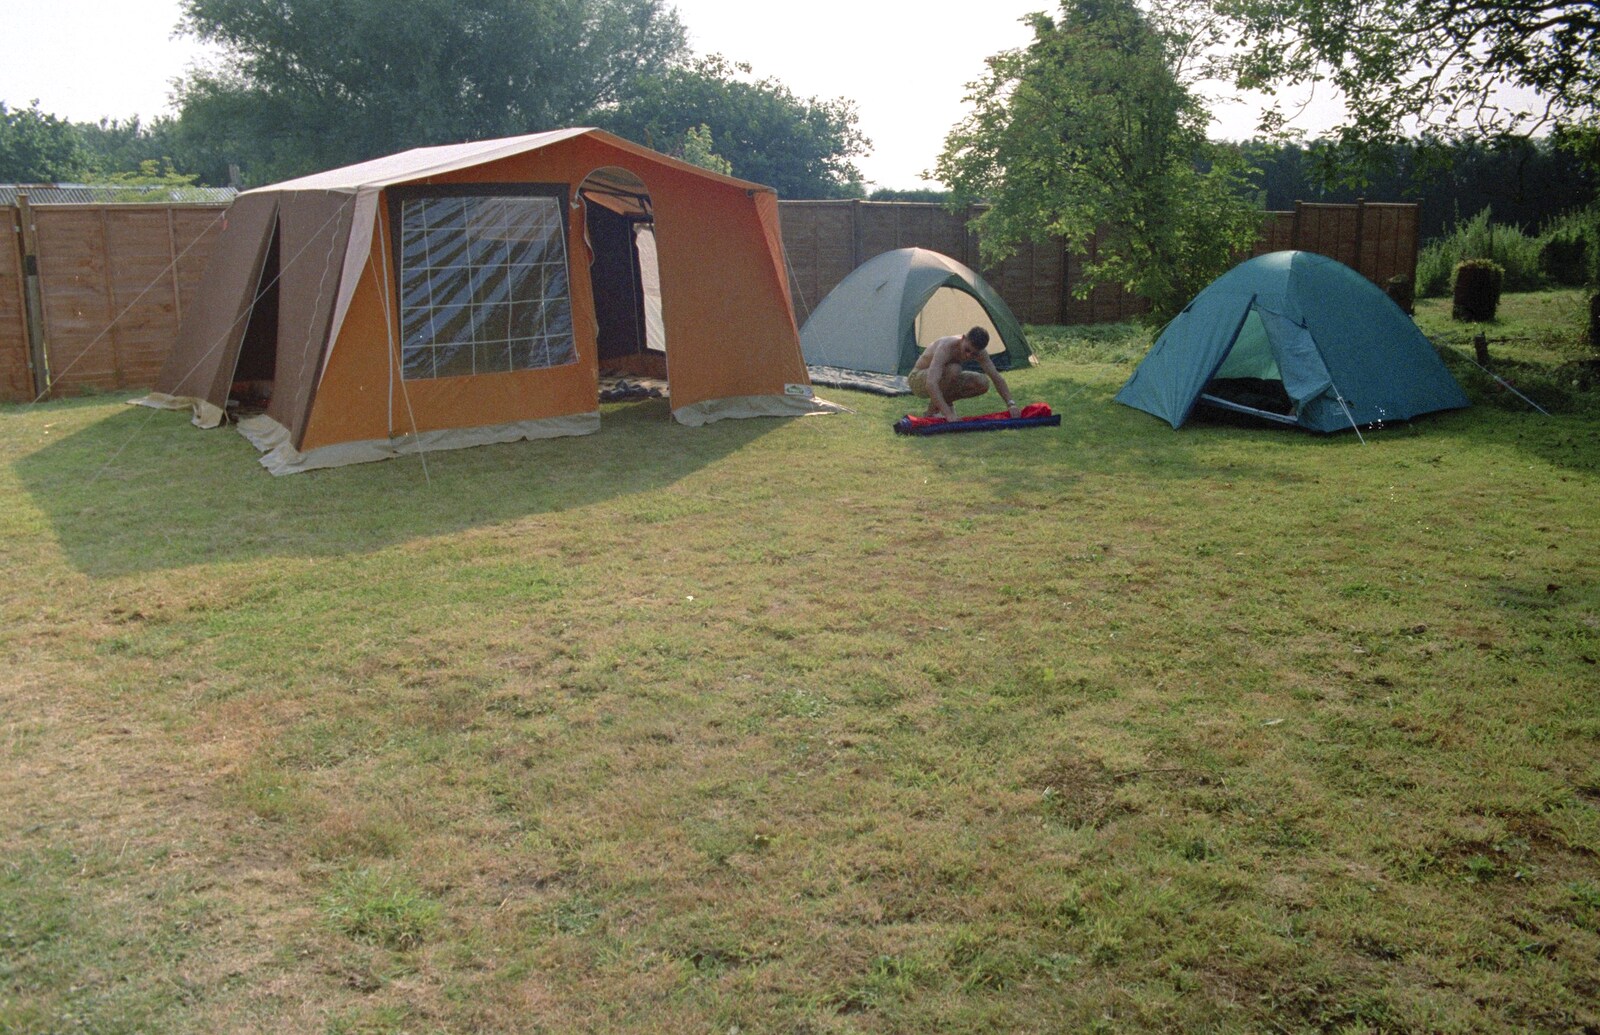 It's Tent City in Nosher's garden from Bromestock 1 and a Mortlock Barbeque, Brome and Thrandeston, Suffolk - 24th June 1997